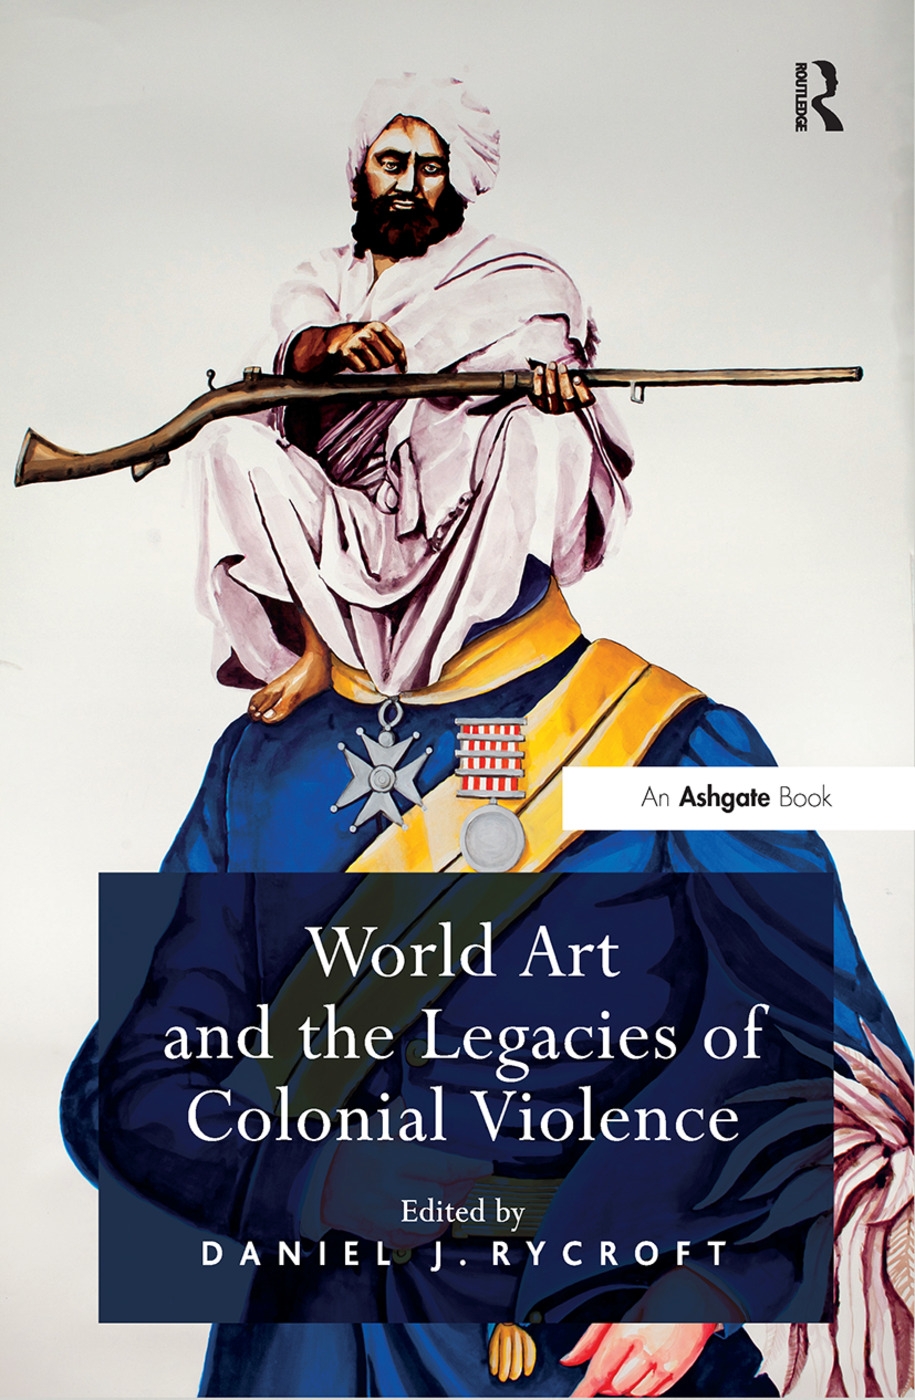 World Art and the Legacies of Colonial Violence. Edited by Daniel Rycroft